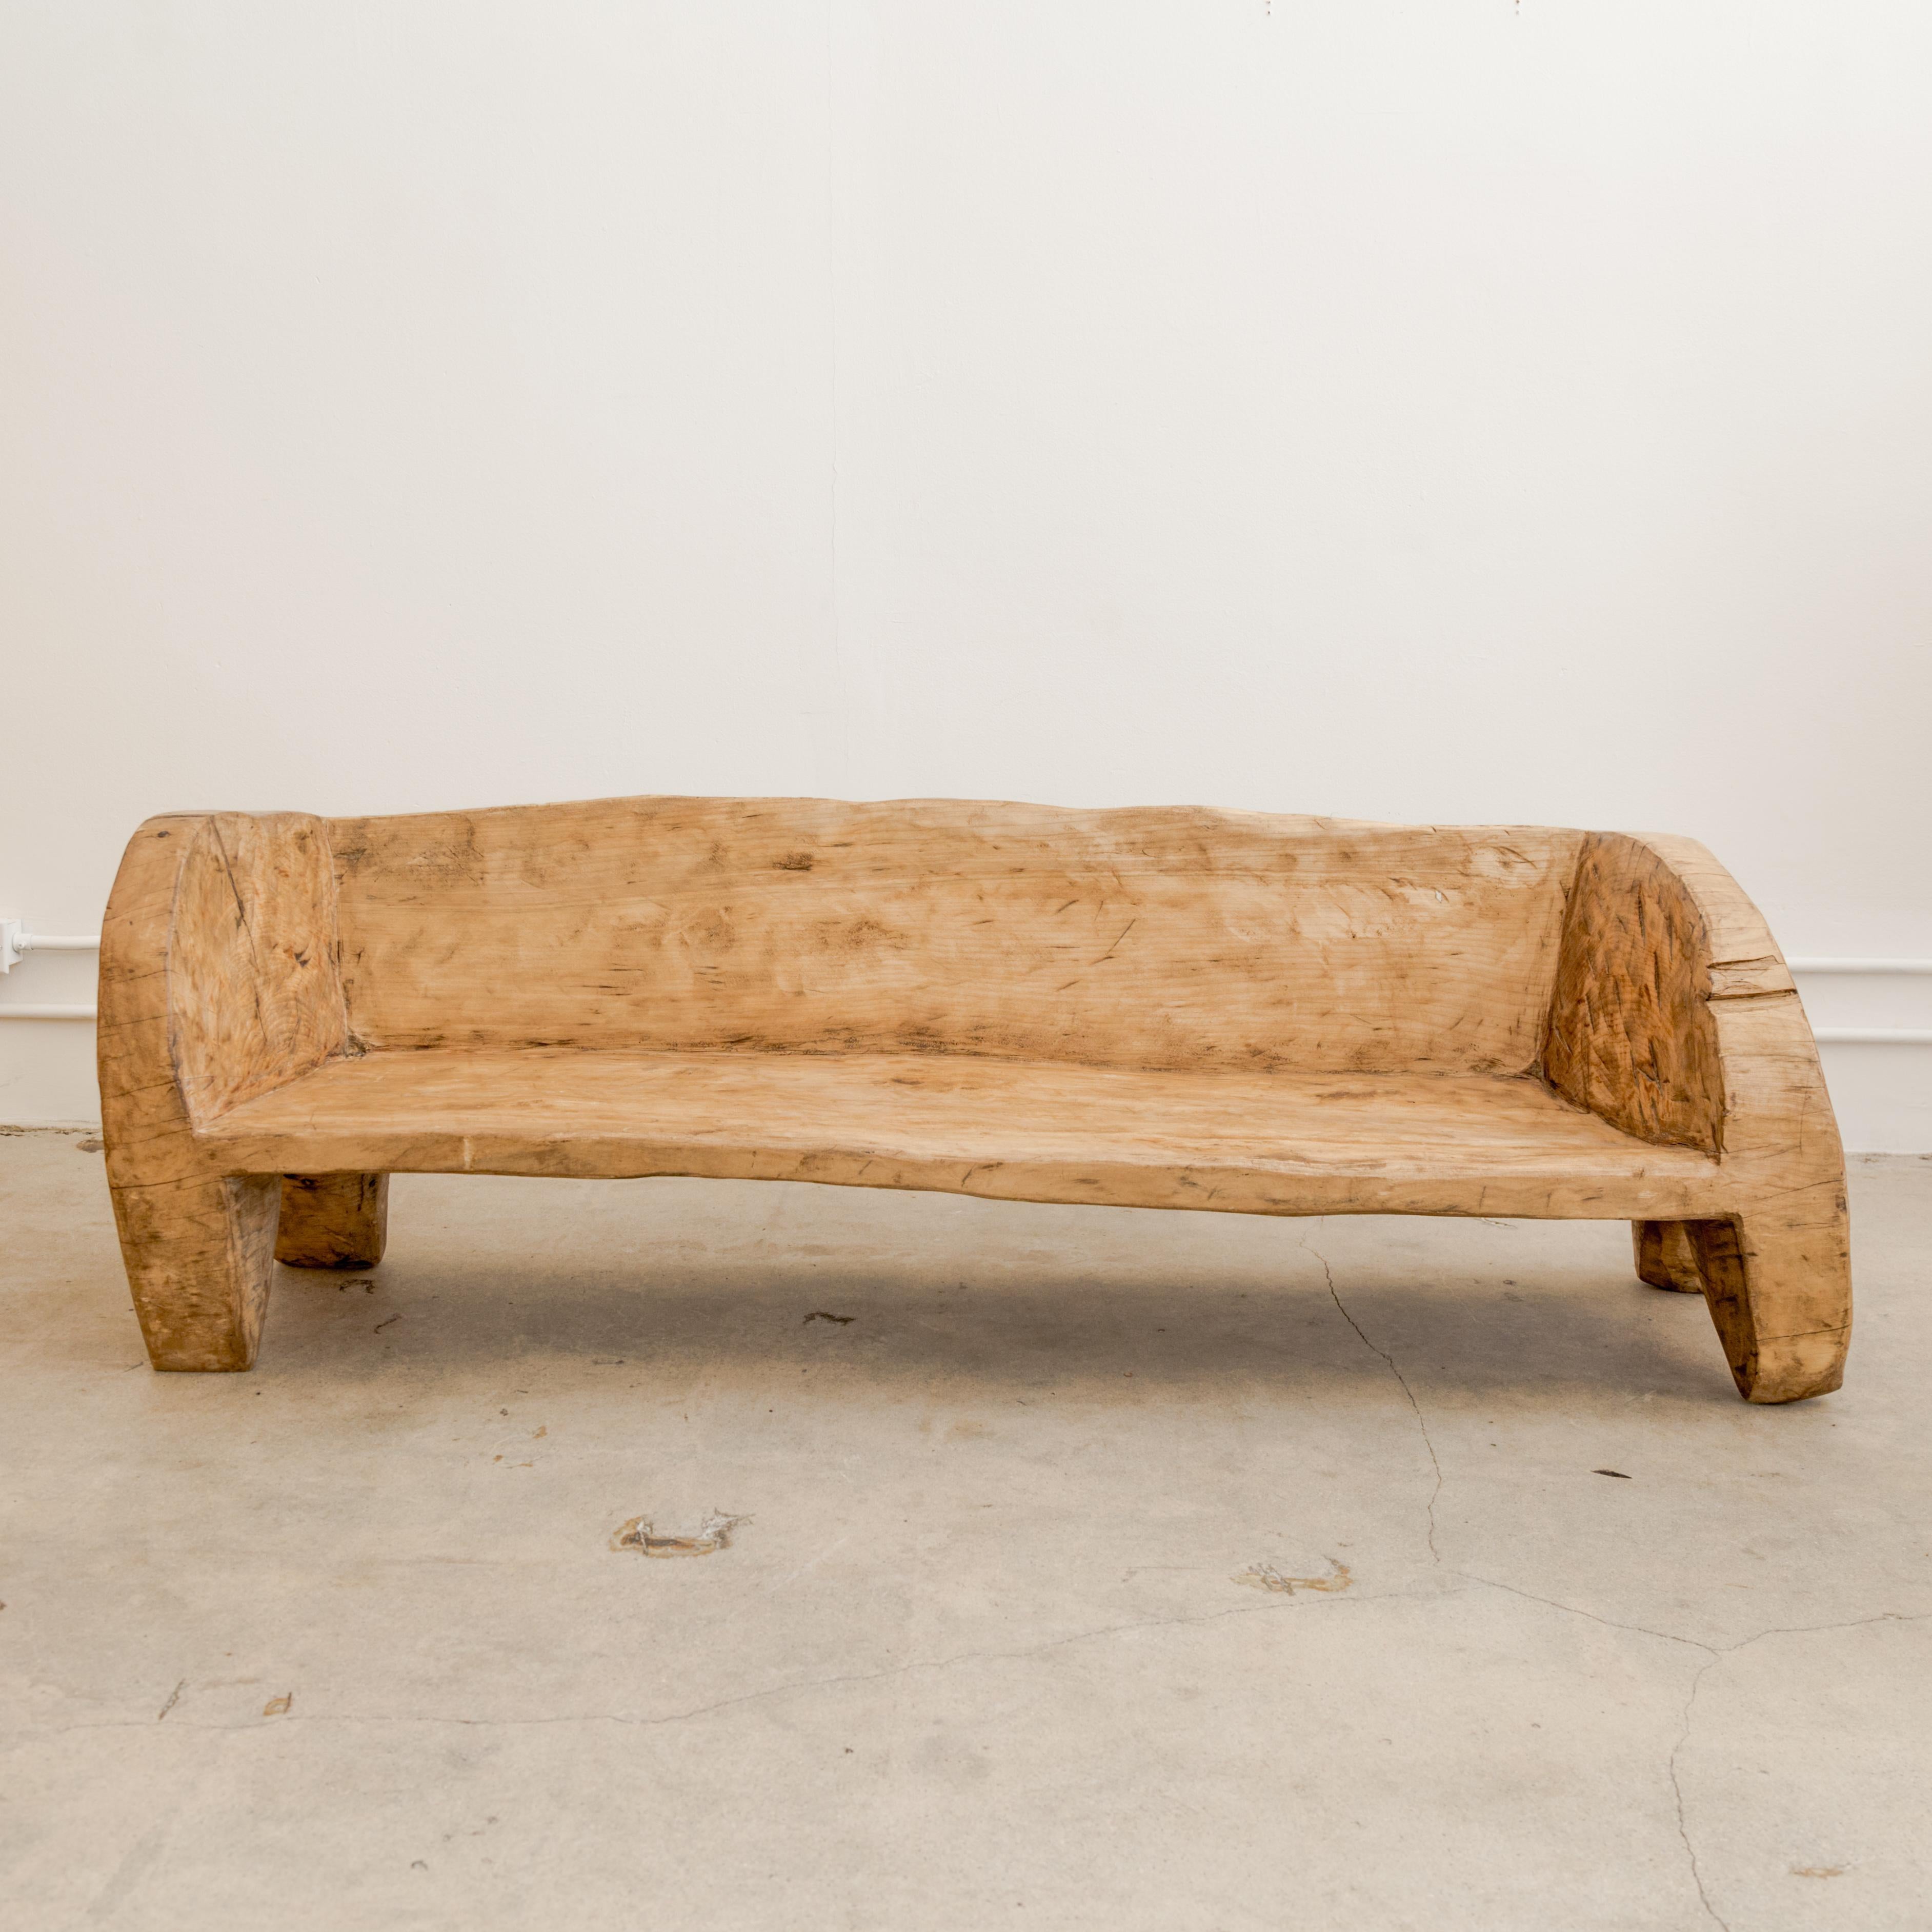 Primitive bench carved from single timber, Indian, contemporary.